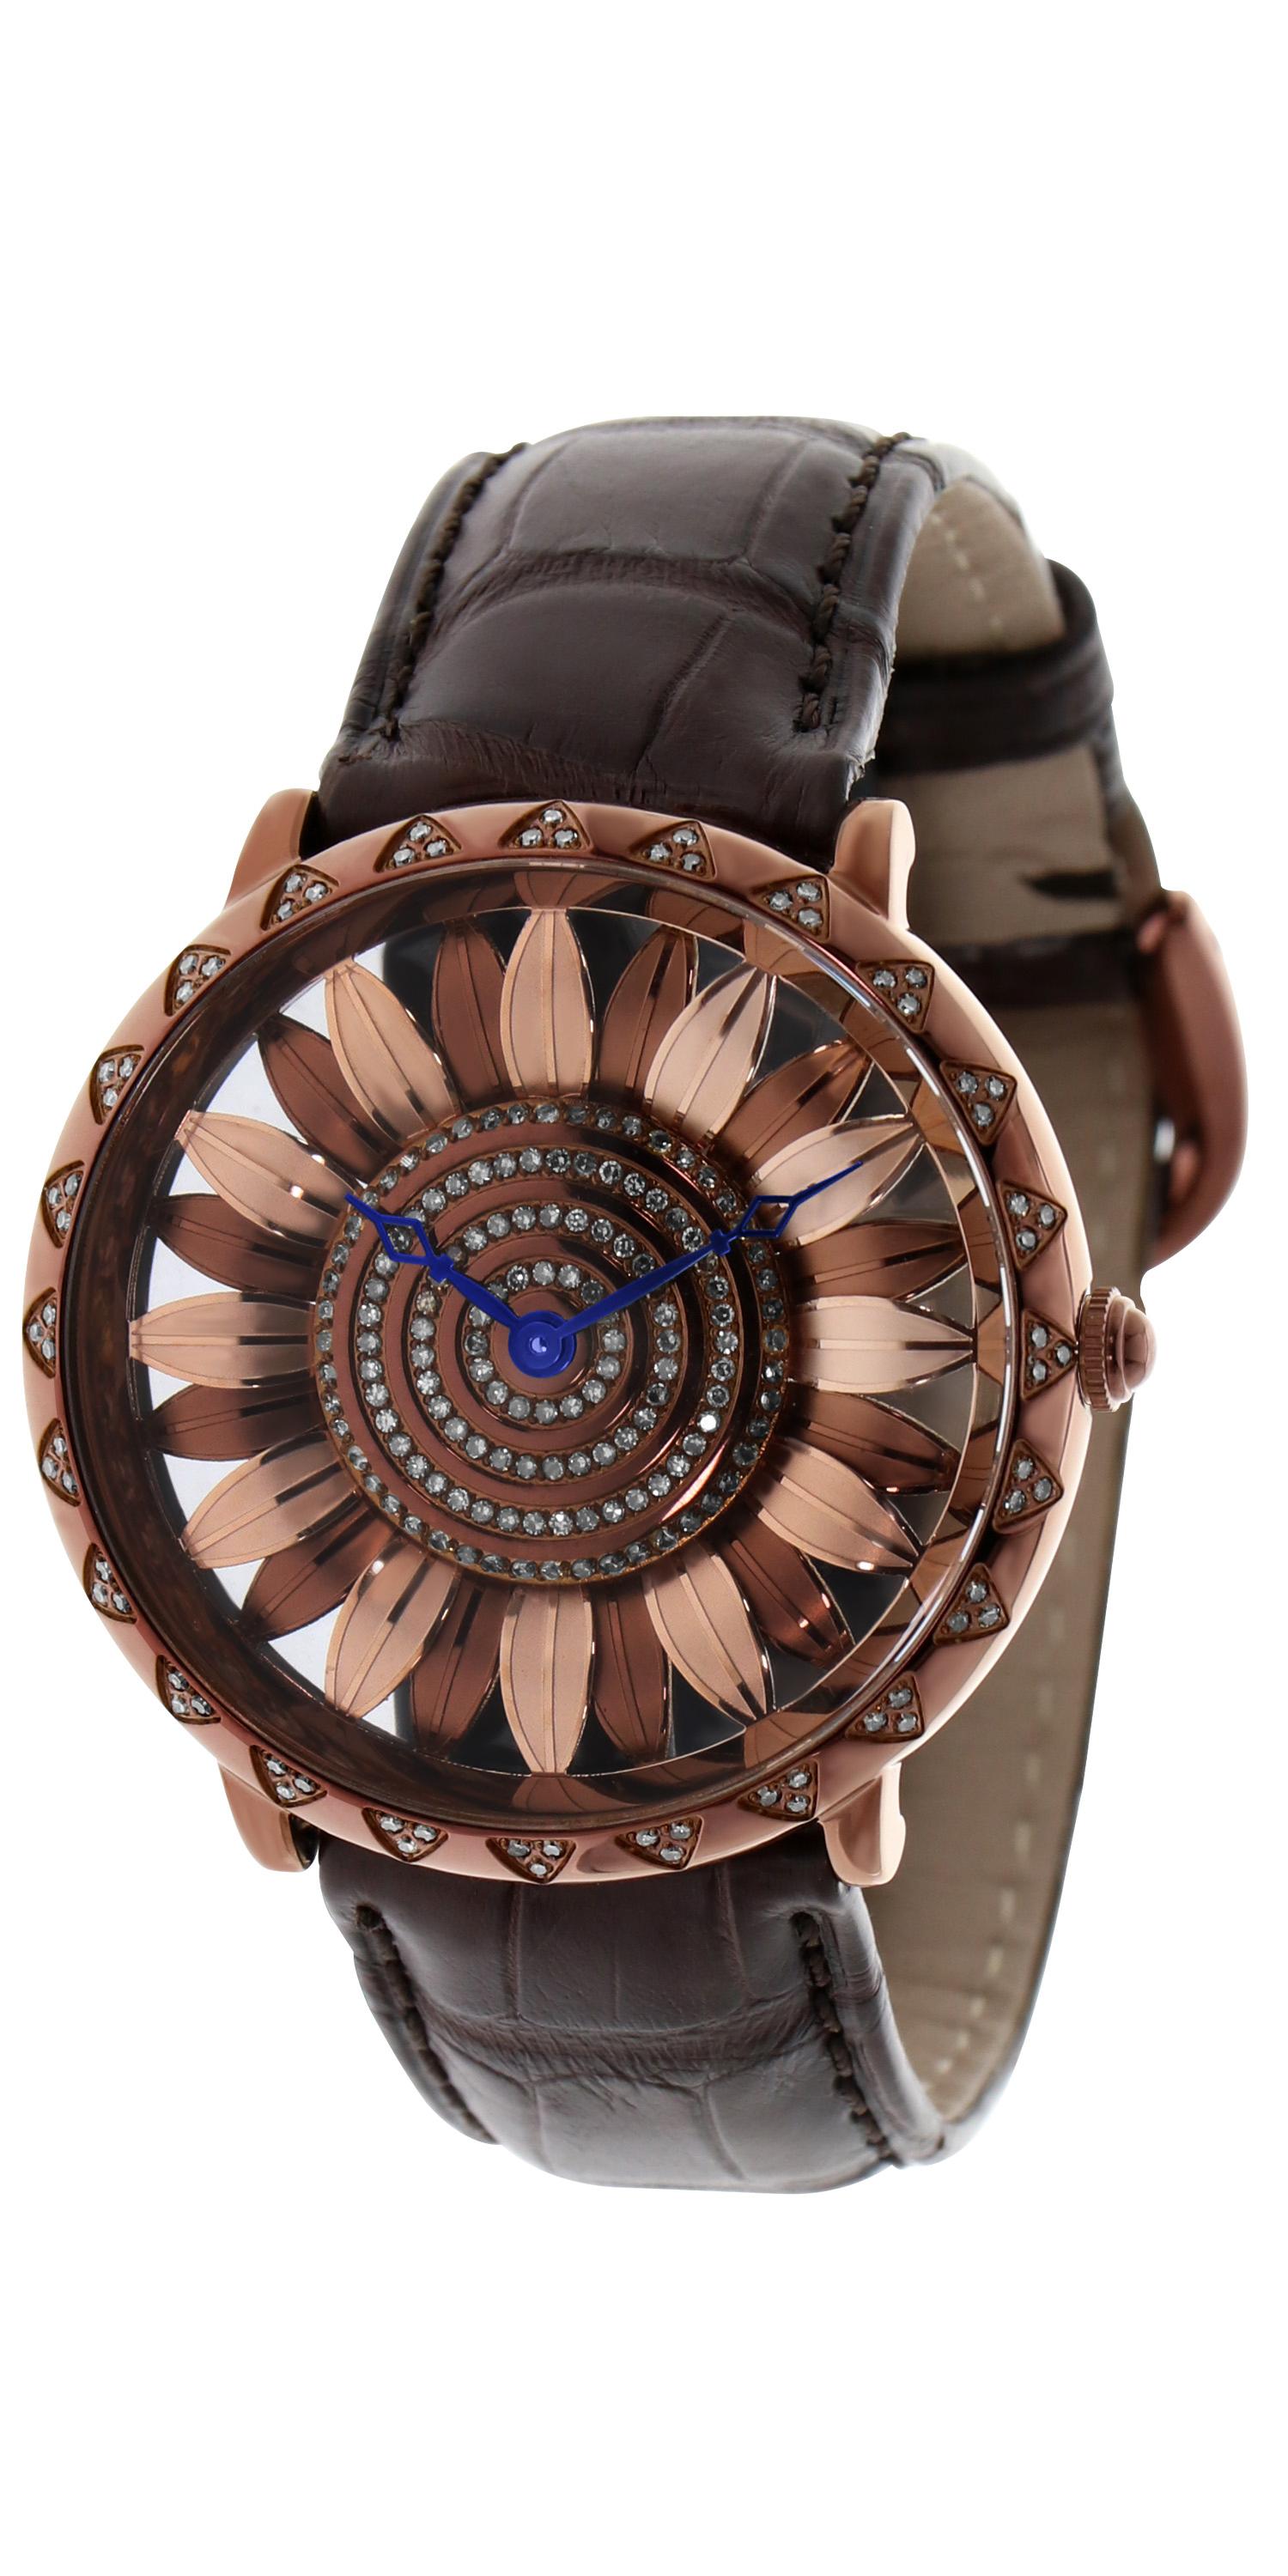 Le Vian 44mm round Wristwatch with 1.04cts of Chocolate Diamonds, 0.1ct of orange Sapphire and set in Stainless Steel with a genuine Alligator Band.